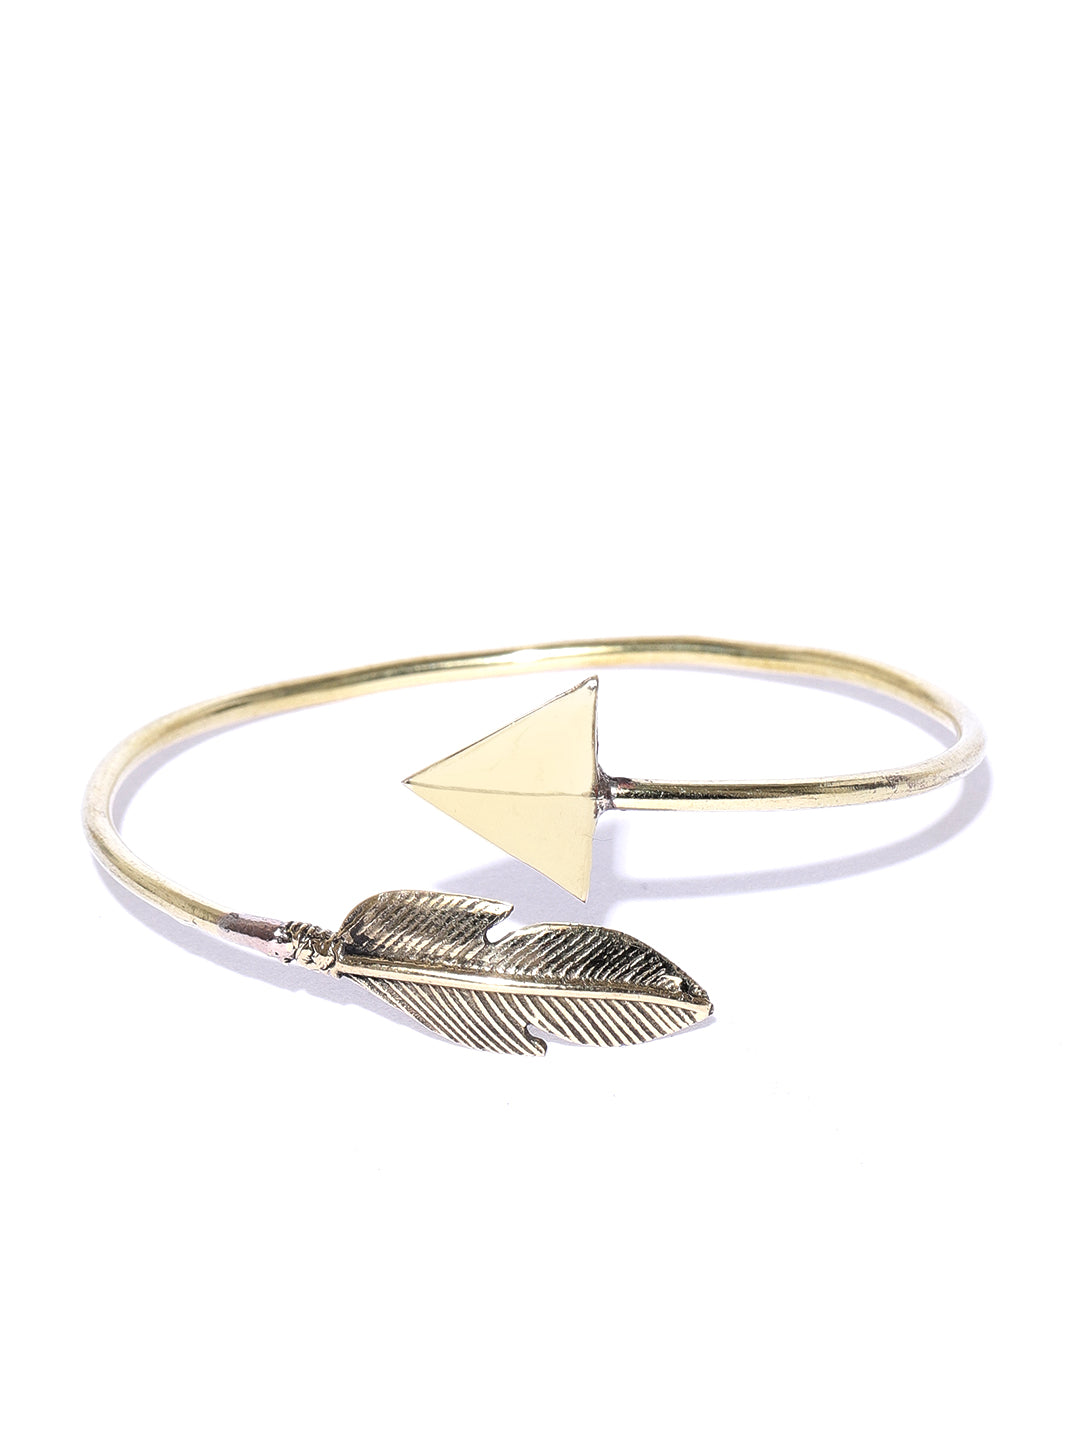 Women's Twisted Inlay Copper Magnetic Therapy Bracelet Bangle